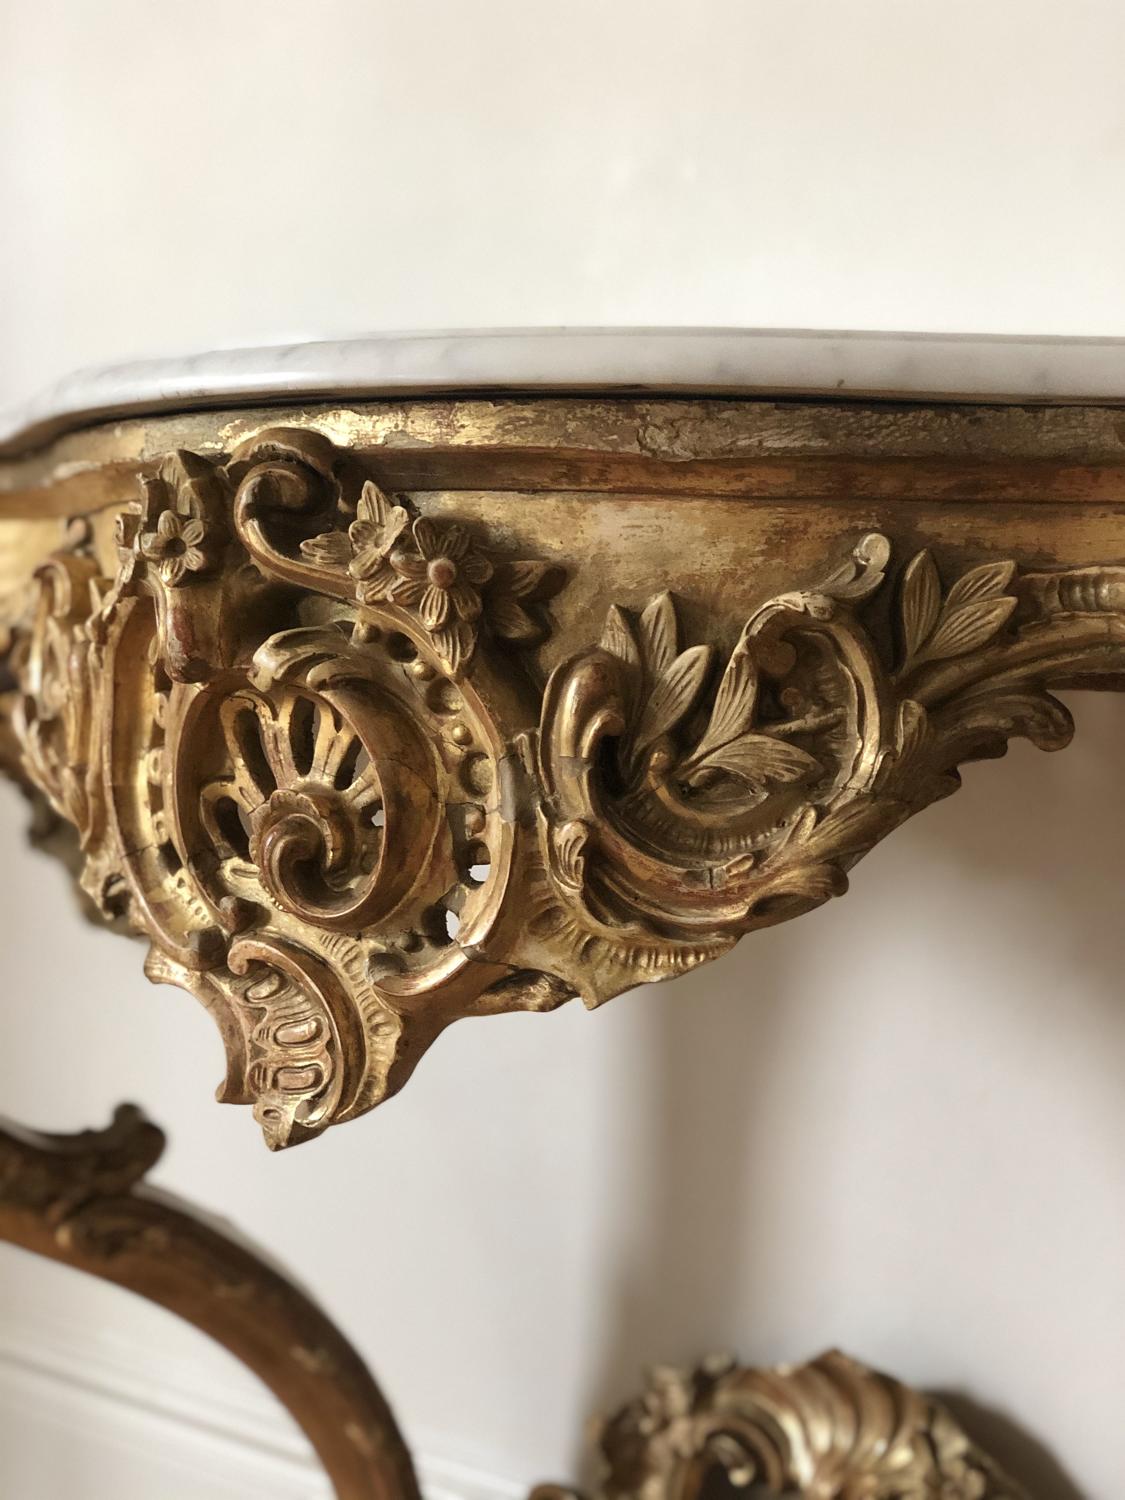 Large 19th century French antique gilt and marble console table